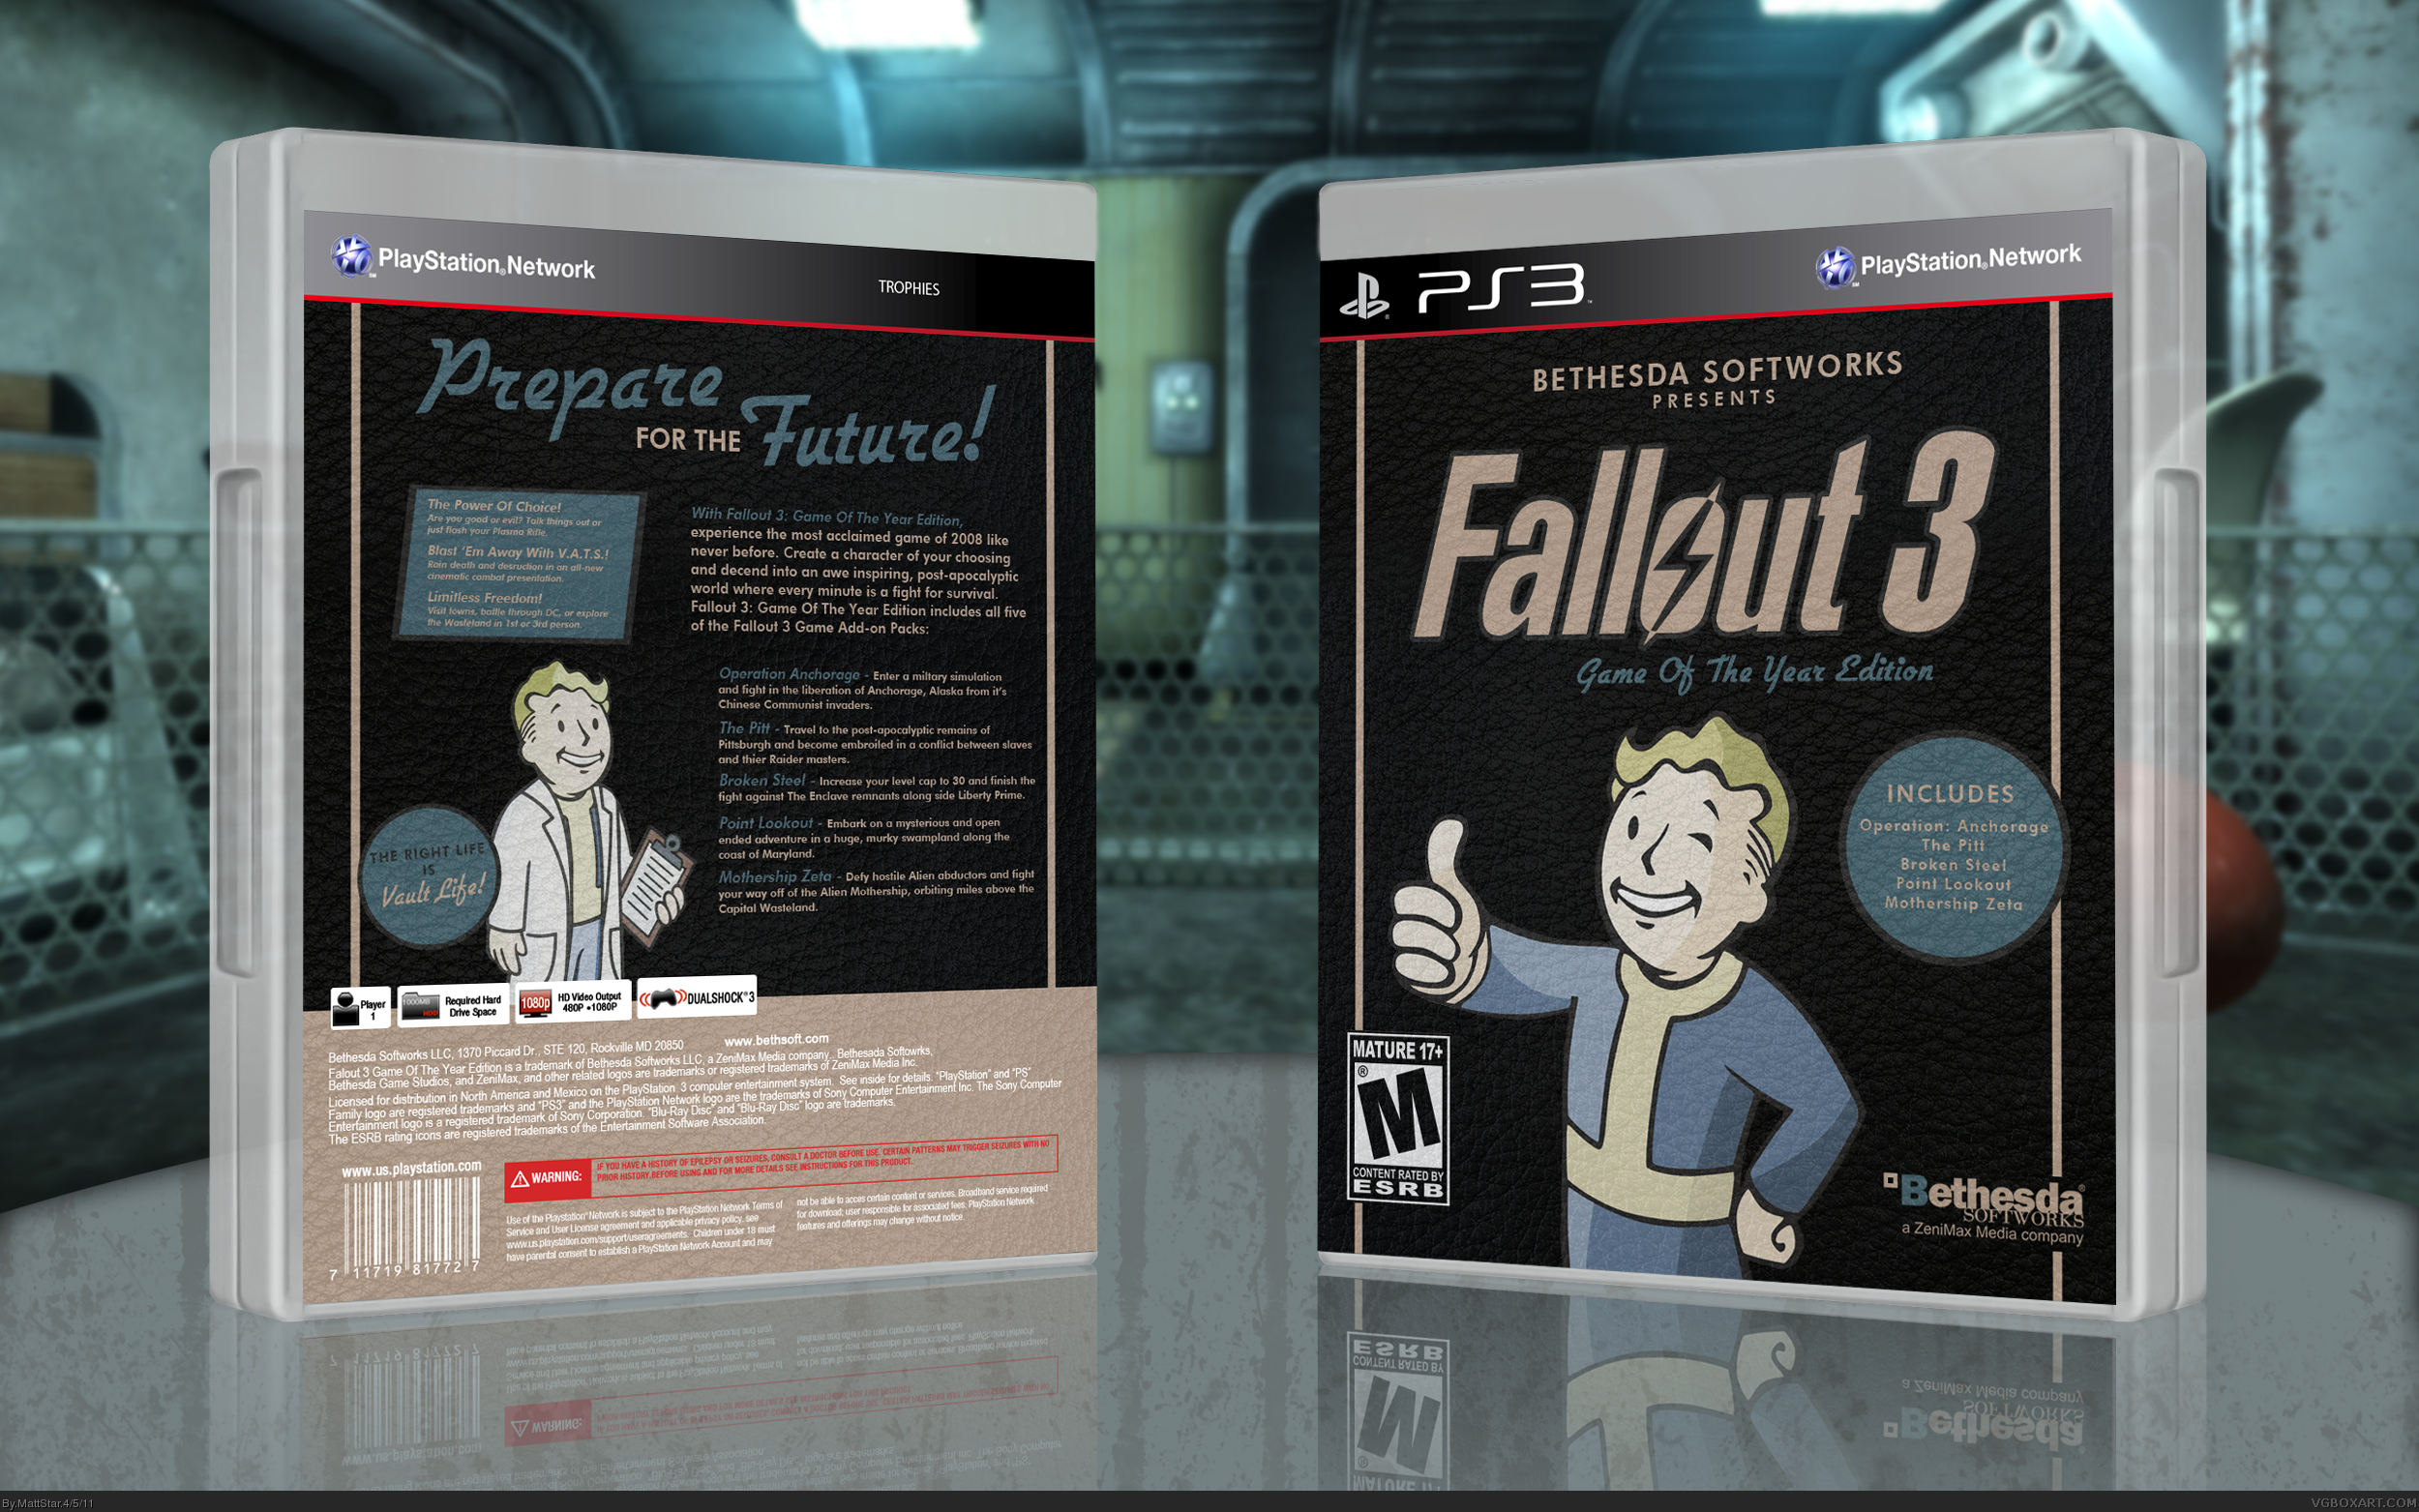 Fallout 3: Game of the Year Edition box cover